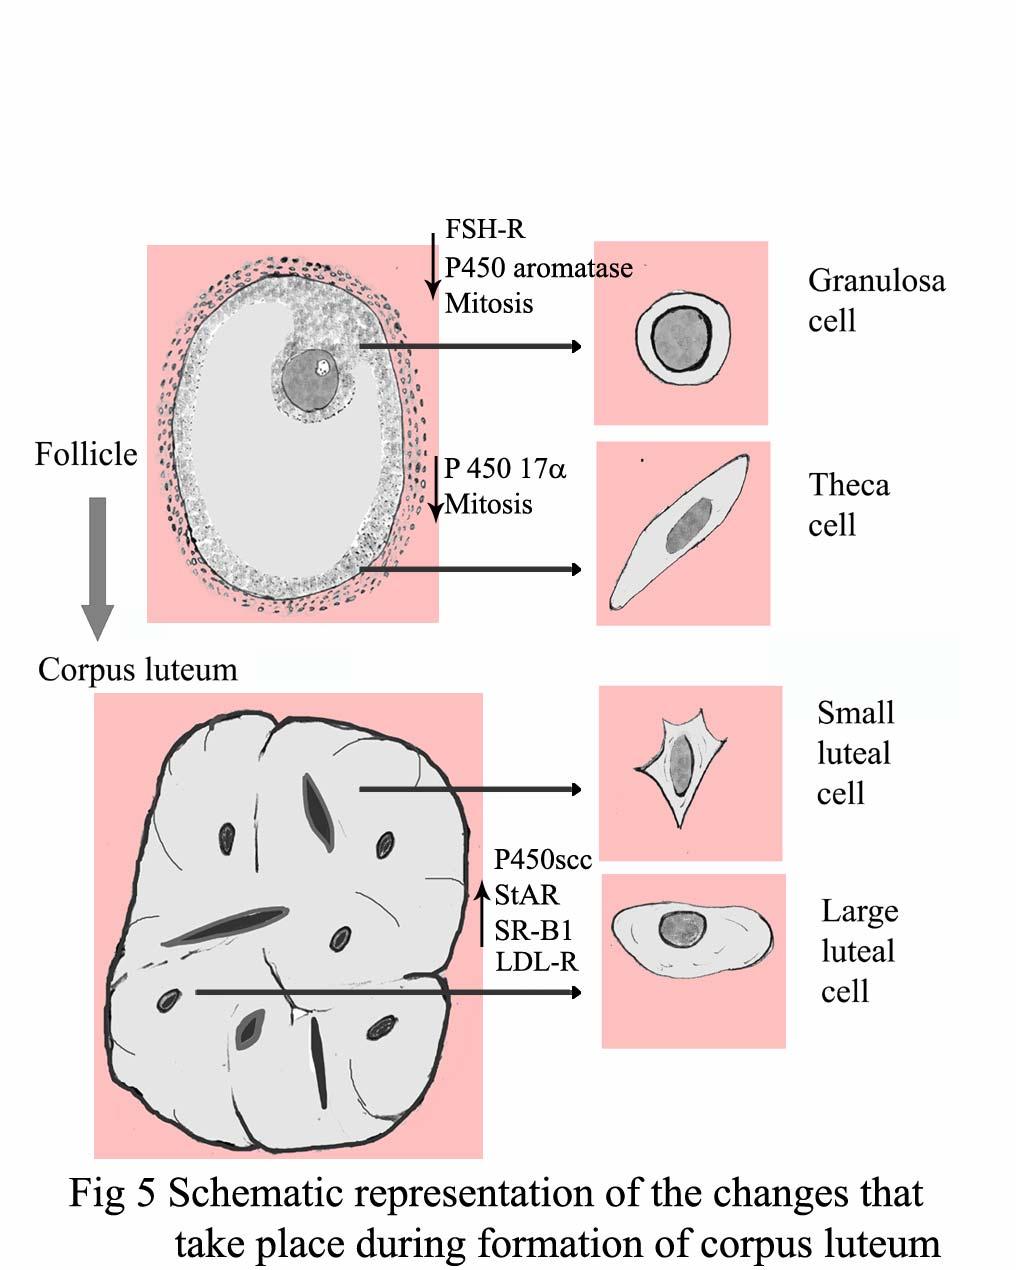 Granulosa cells along with thecal cells infiltrate the collapsed follicle together with a rich supply of blood vessels. The filtrating cells undergo hypertrophy and hyperplasia.